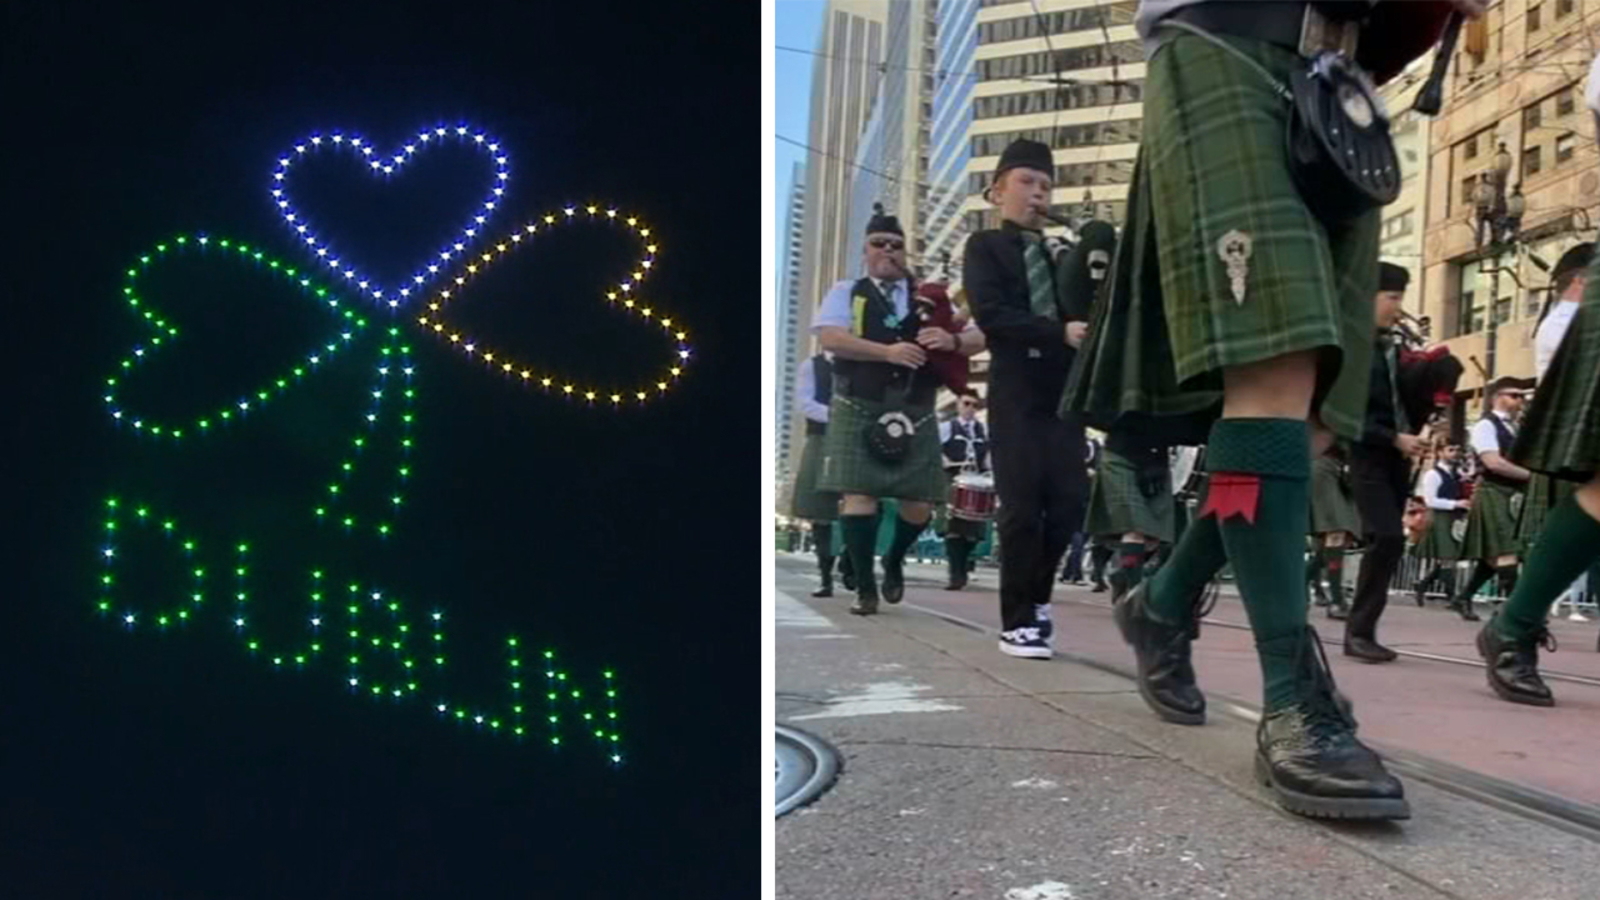 Bay Area kicks off St. Patrick’s Day festivities with 200-drone light show, annual parade; Dublin celebrates 40th anniversary [Video]